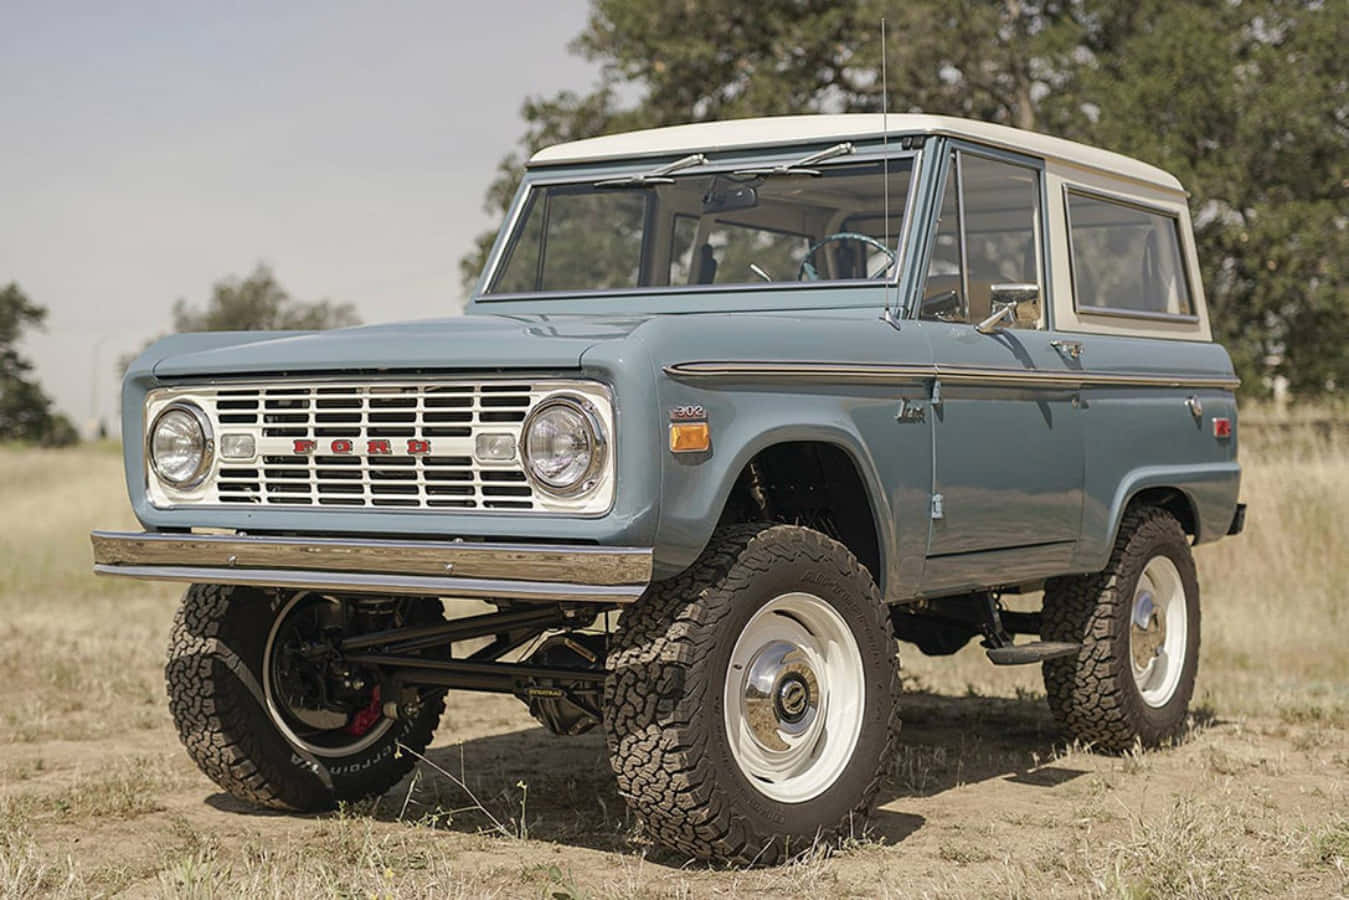 Get out and explore with the Ford Bronco